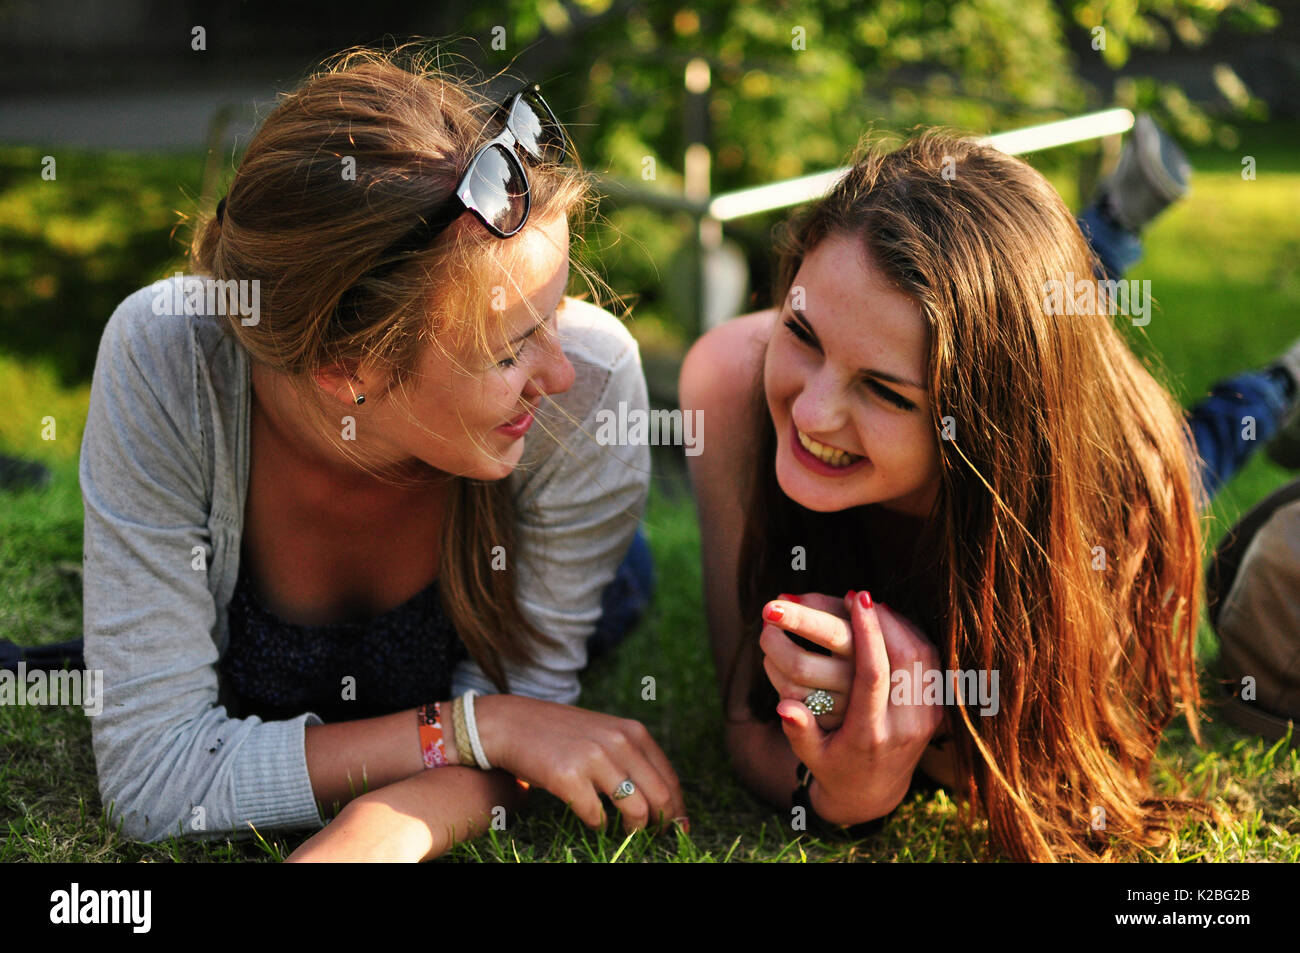 Two giggling friends lying on grass Stock Photo